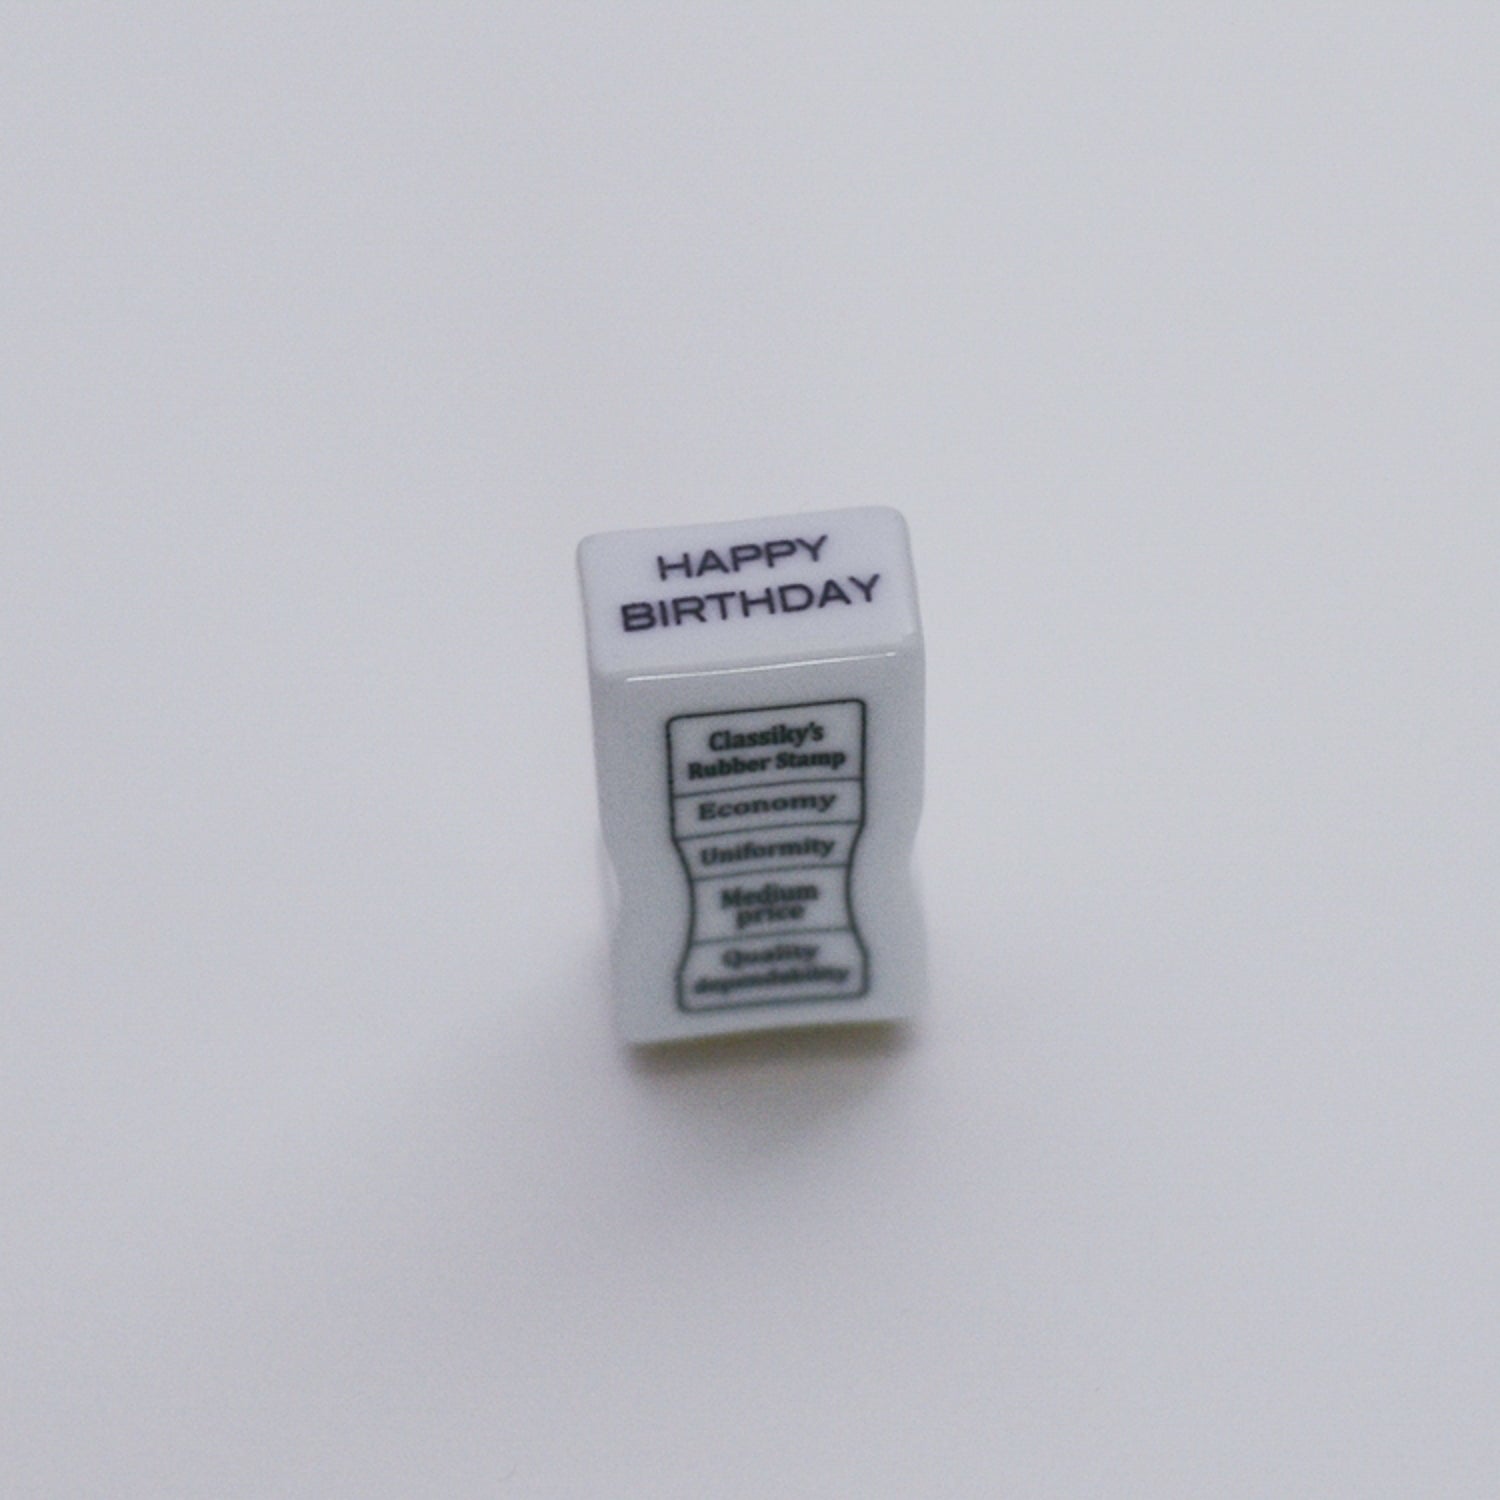 Stamps / Label Makers